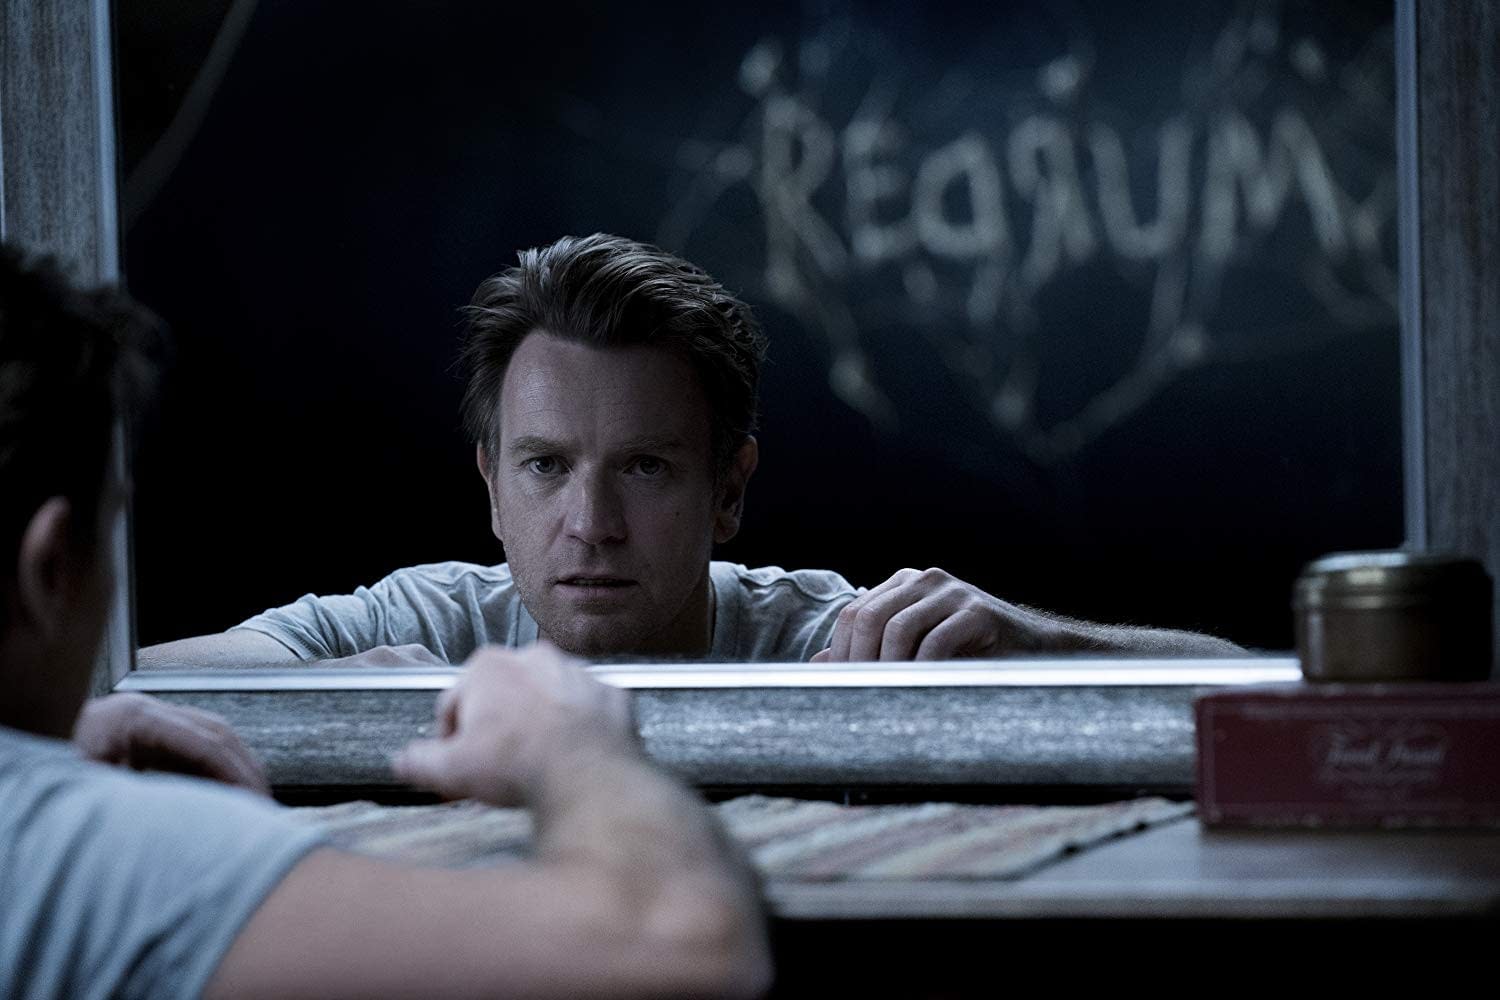 RanKING: From "Doctor Sleep" to "It, Chapter 2"-- The Best to Worst of Stephen King Adaptations 2019